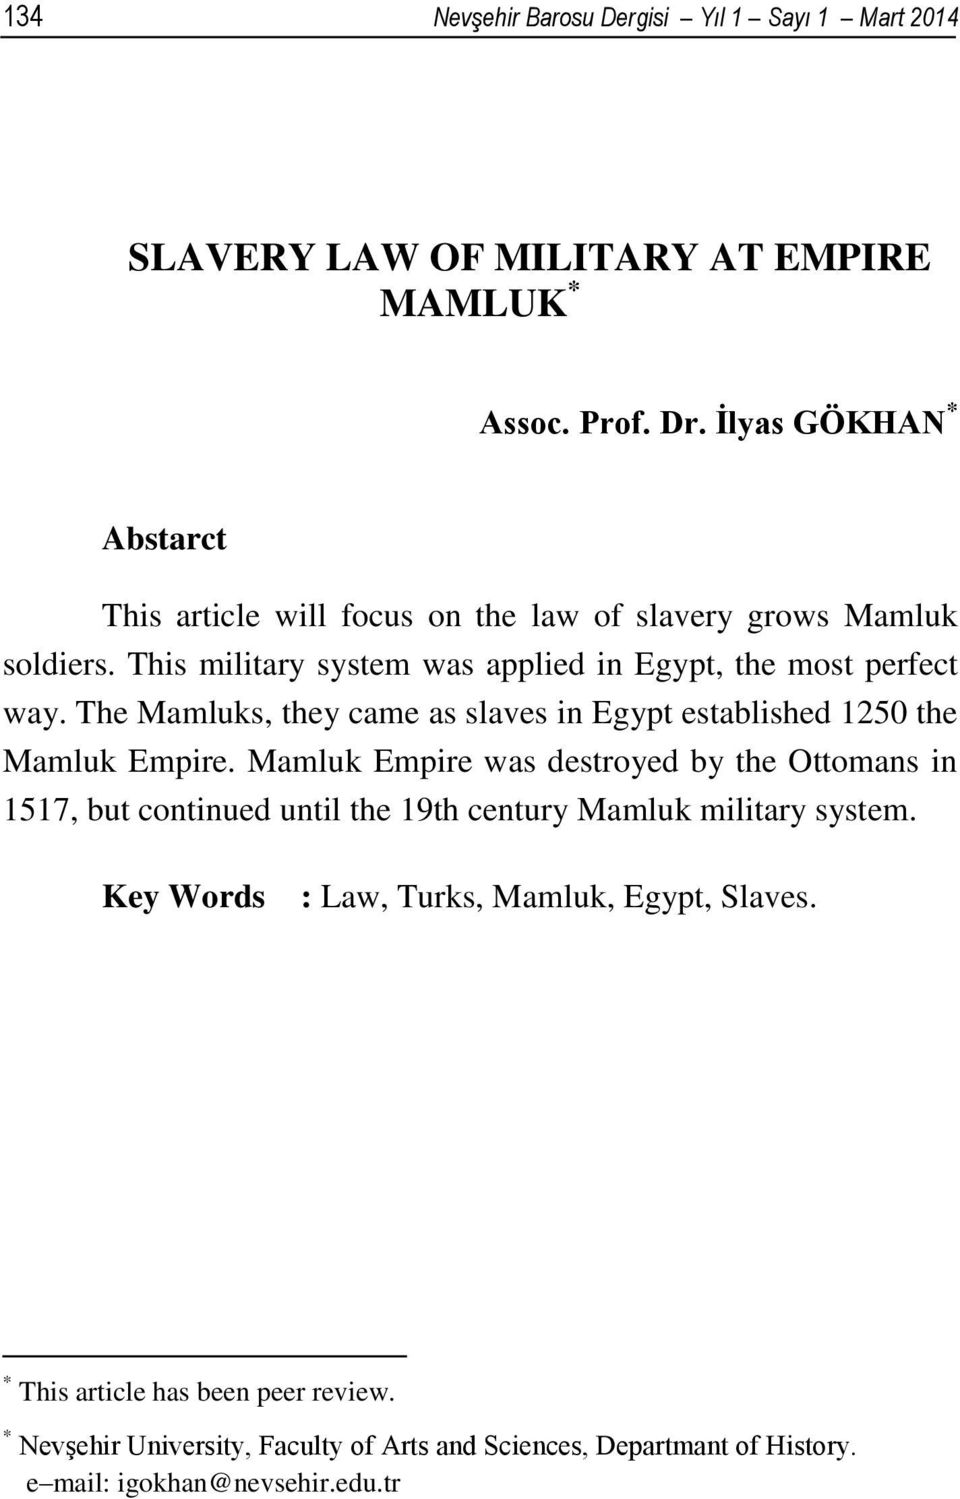 The Mamluks, they came as slaves in Egypt established 1250 the Mamluk Empire.